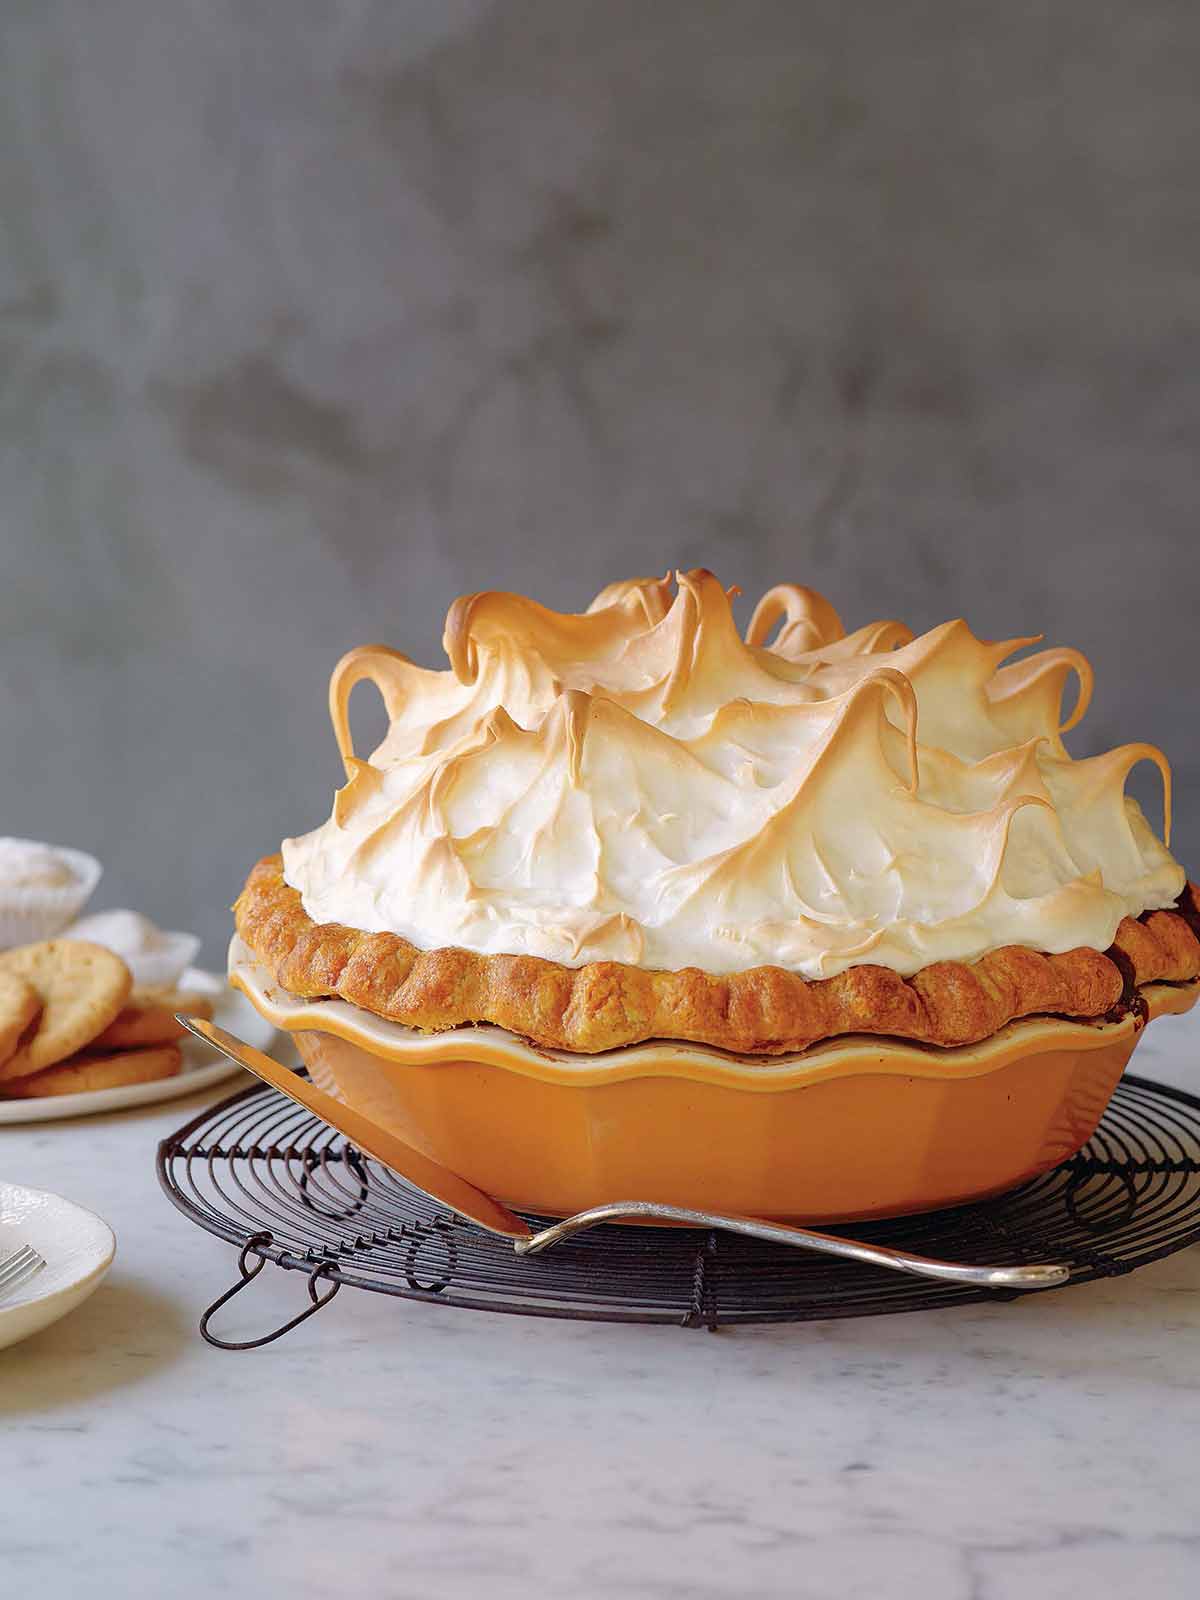 A pumpkin pie with a toasted meringue topping on a wire cooling rack.